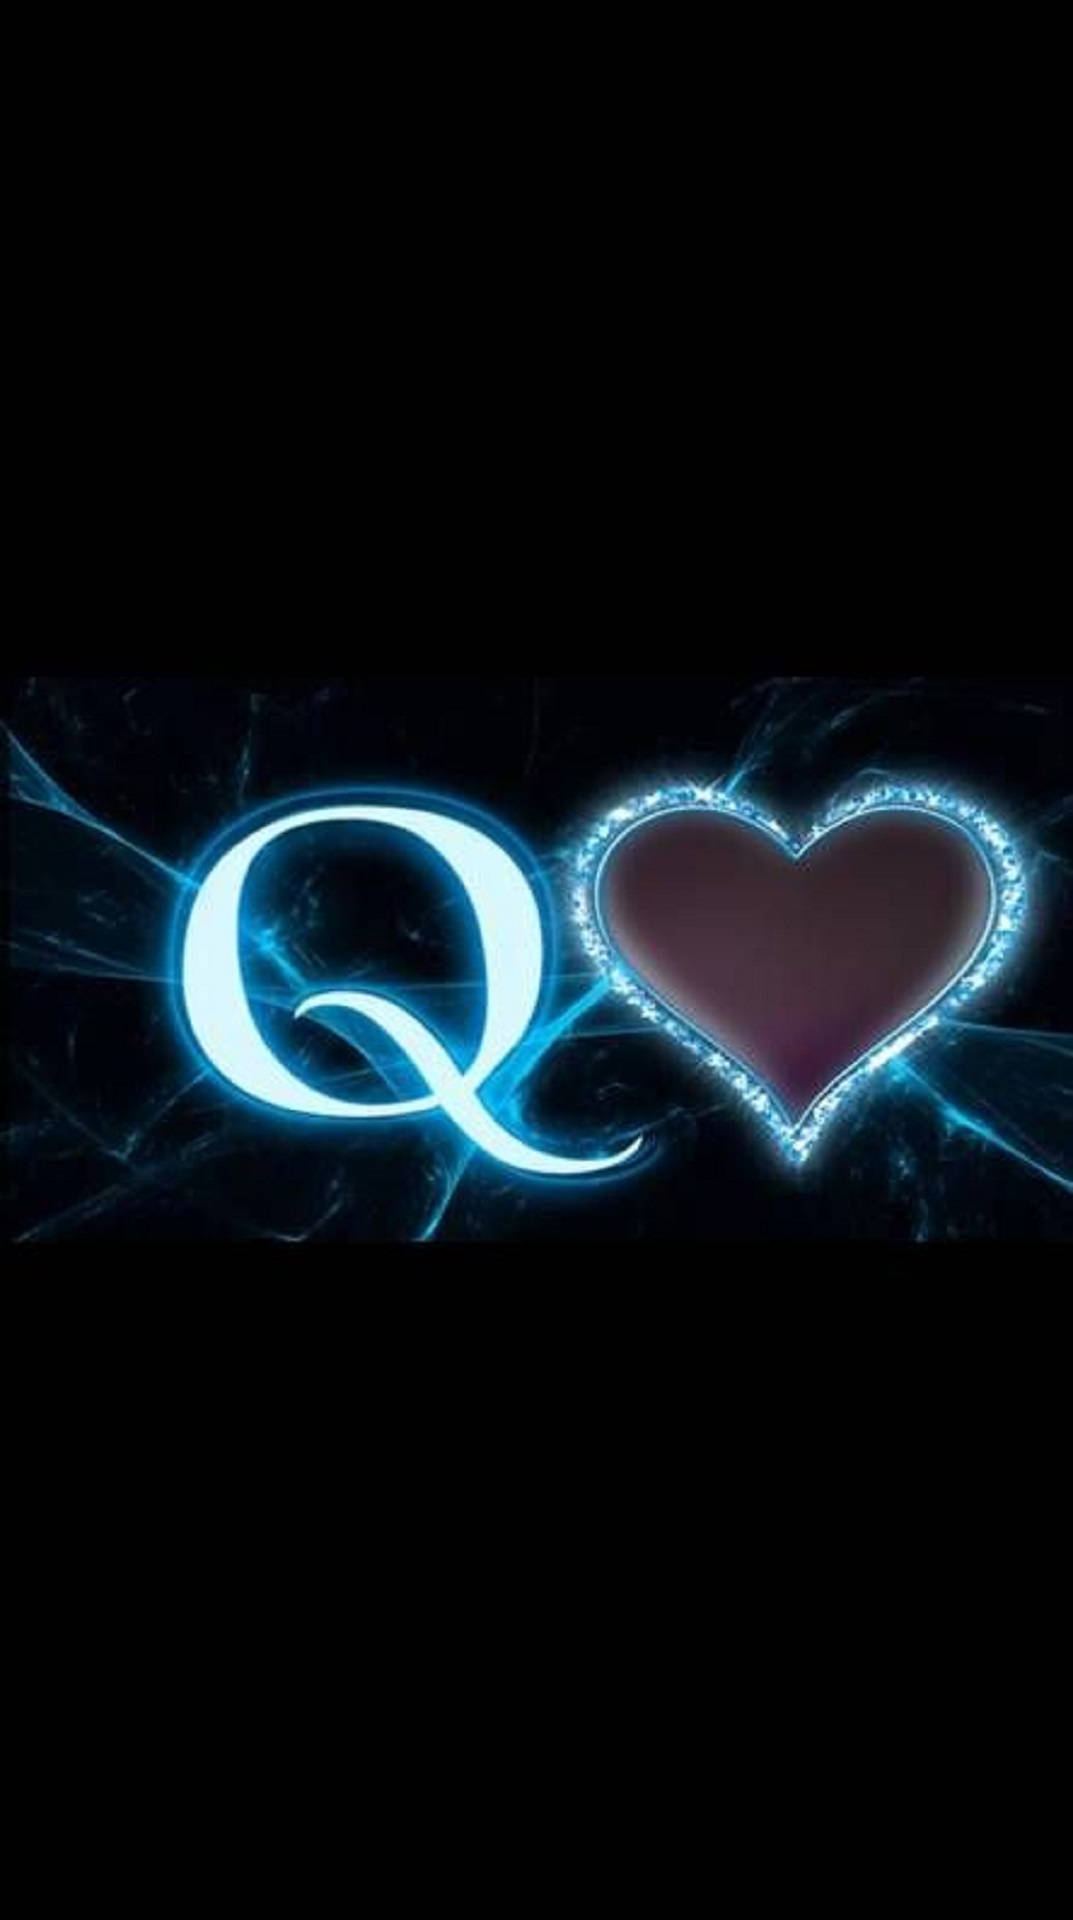 Letter Q With Blue Heart